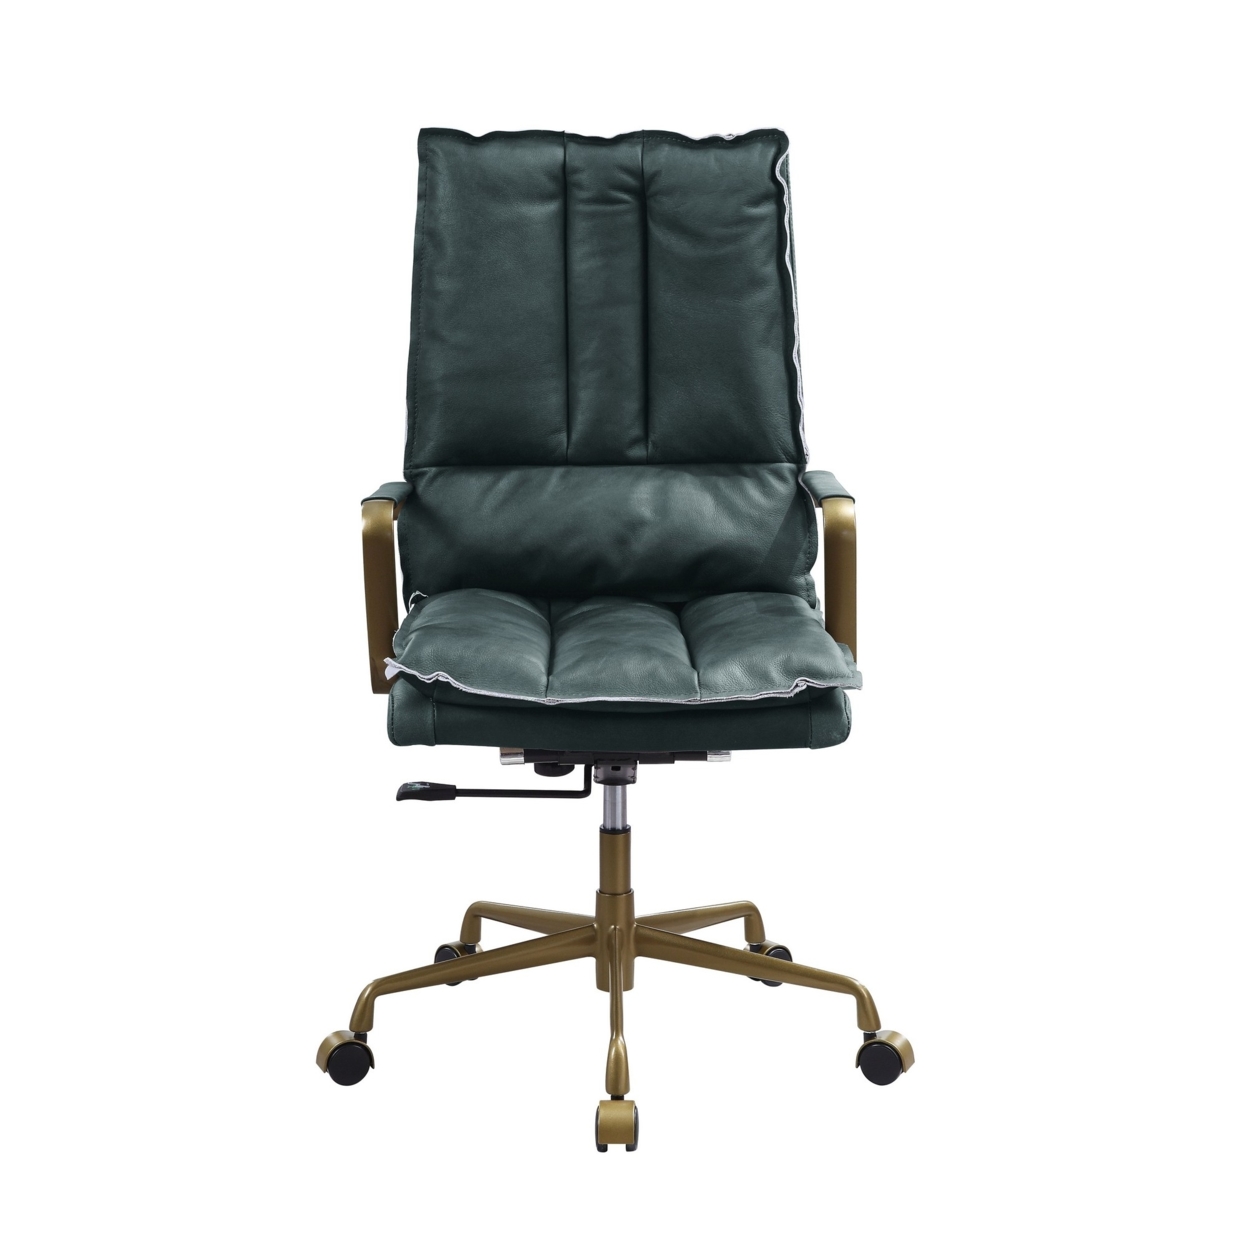 Office Chair With 360 Degrees Swivel, Dark Green And Brown- Saltoro Sherpi